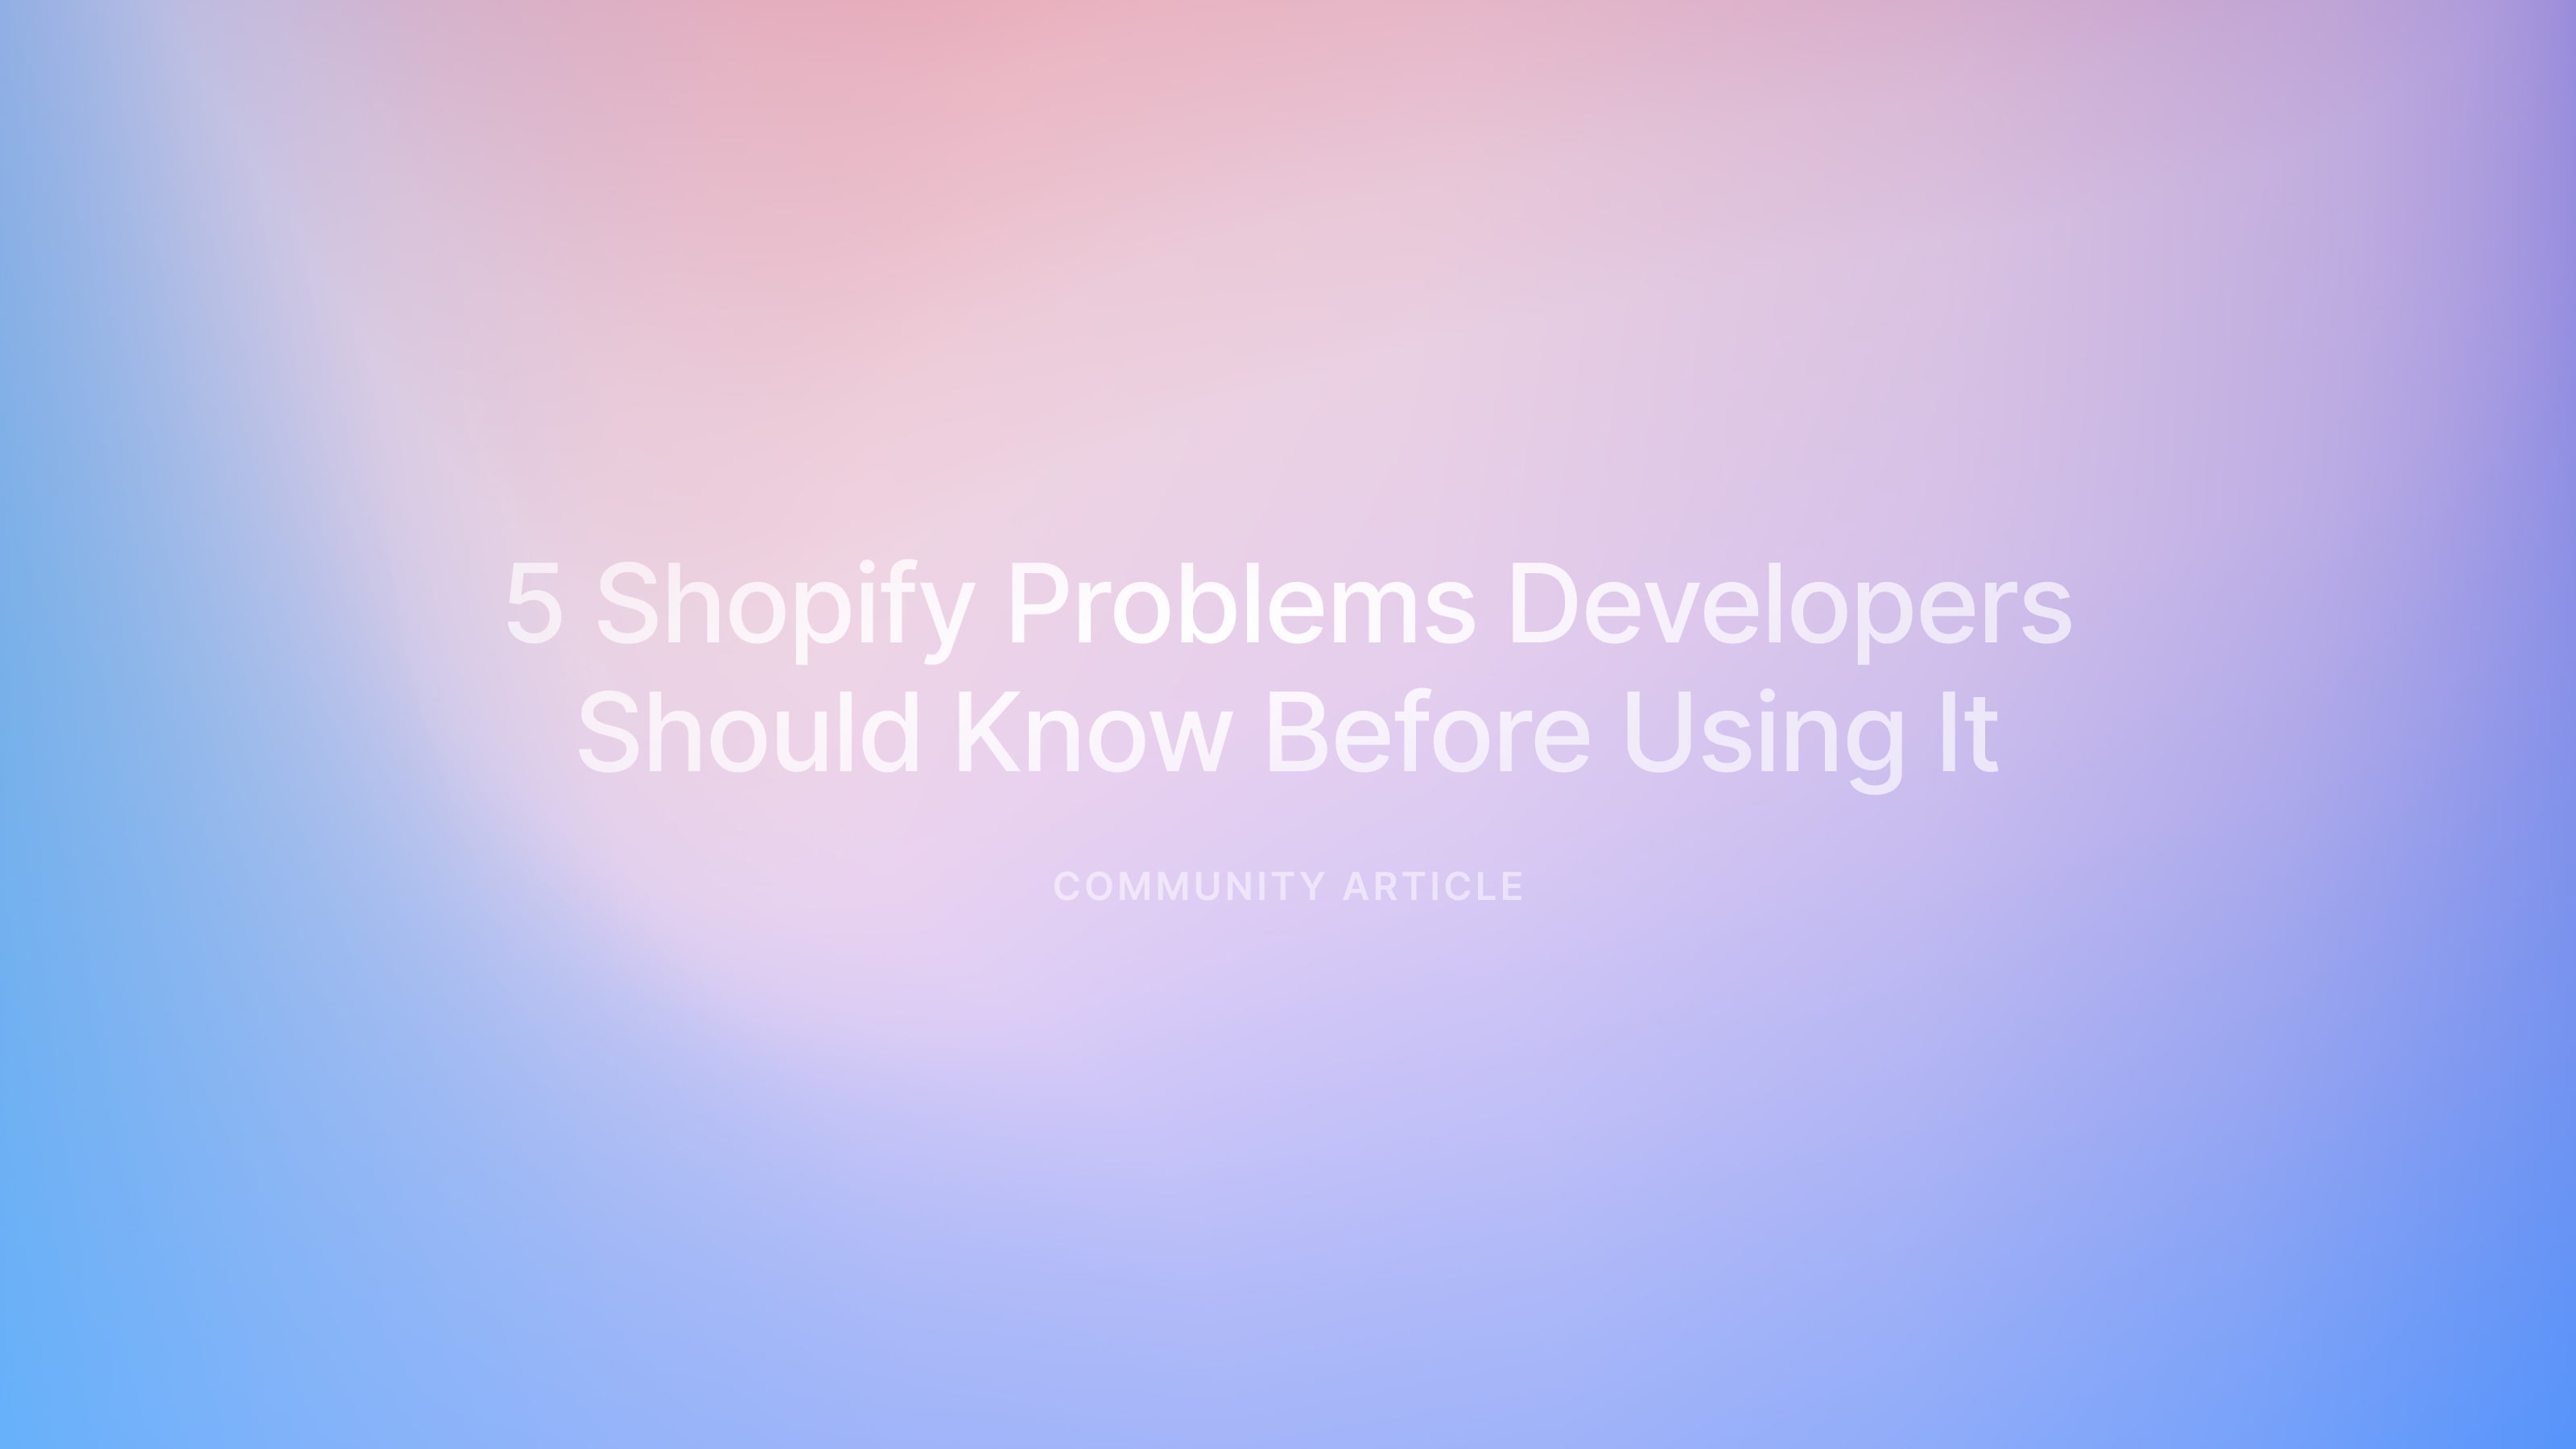 5 Shopify Problems Developers Should Know Before Using It